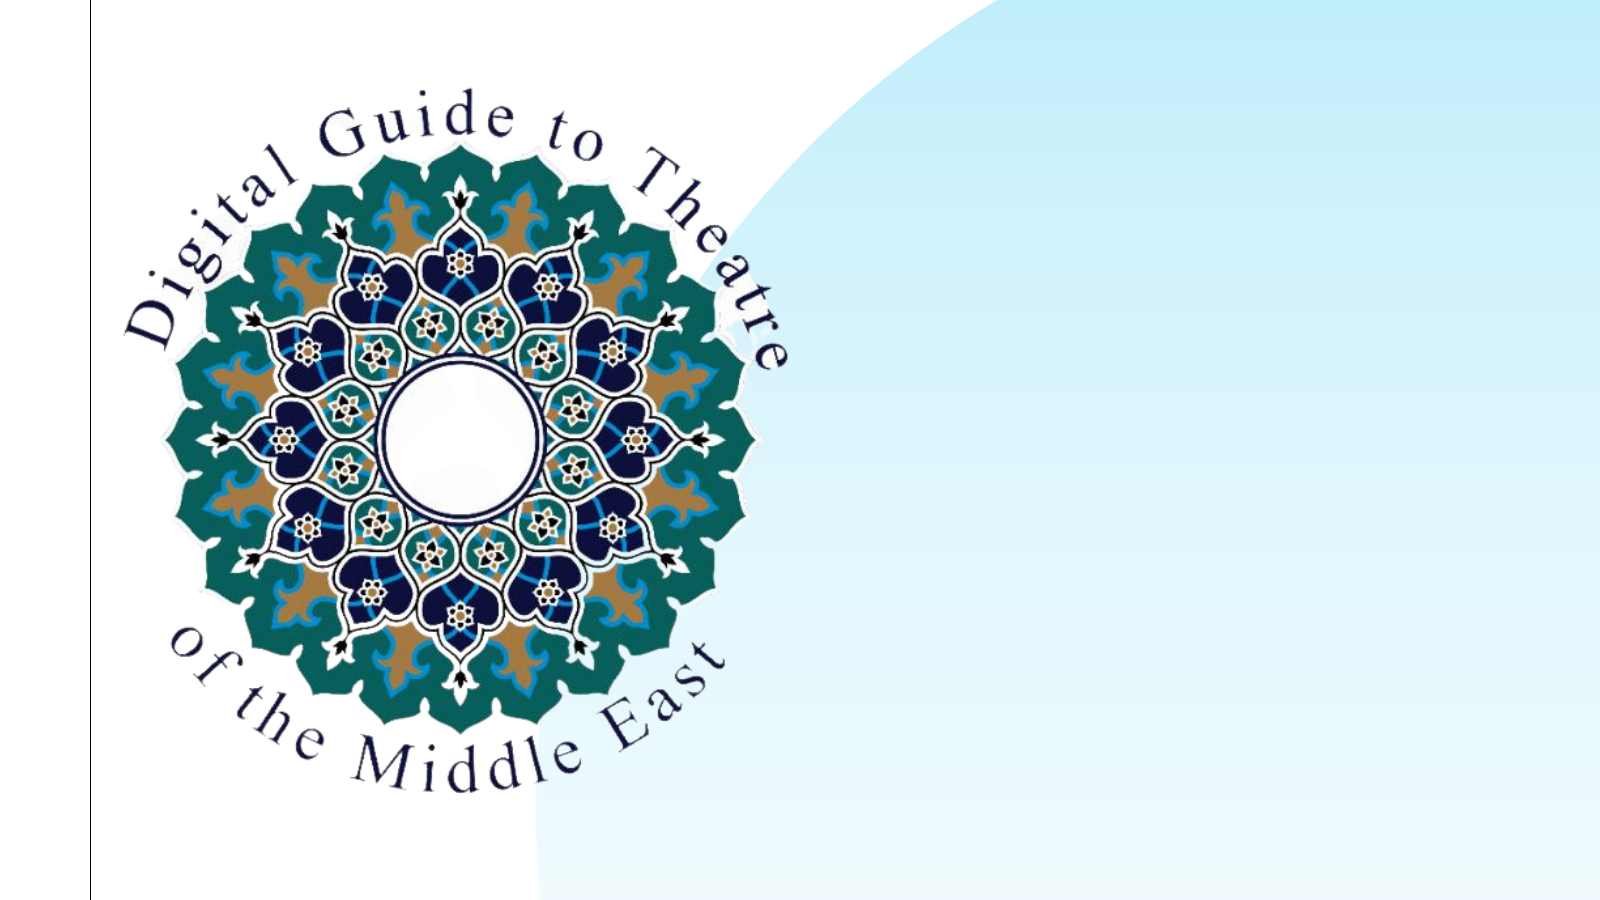 digital guide to theater of the middle east logo